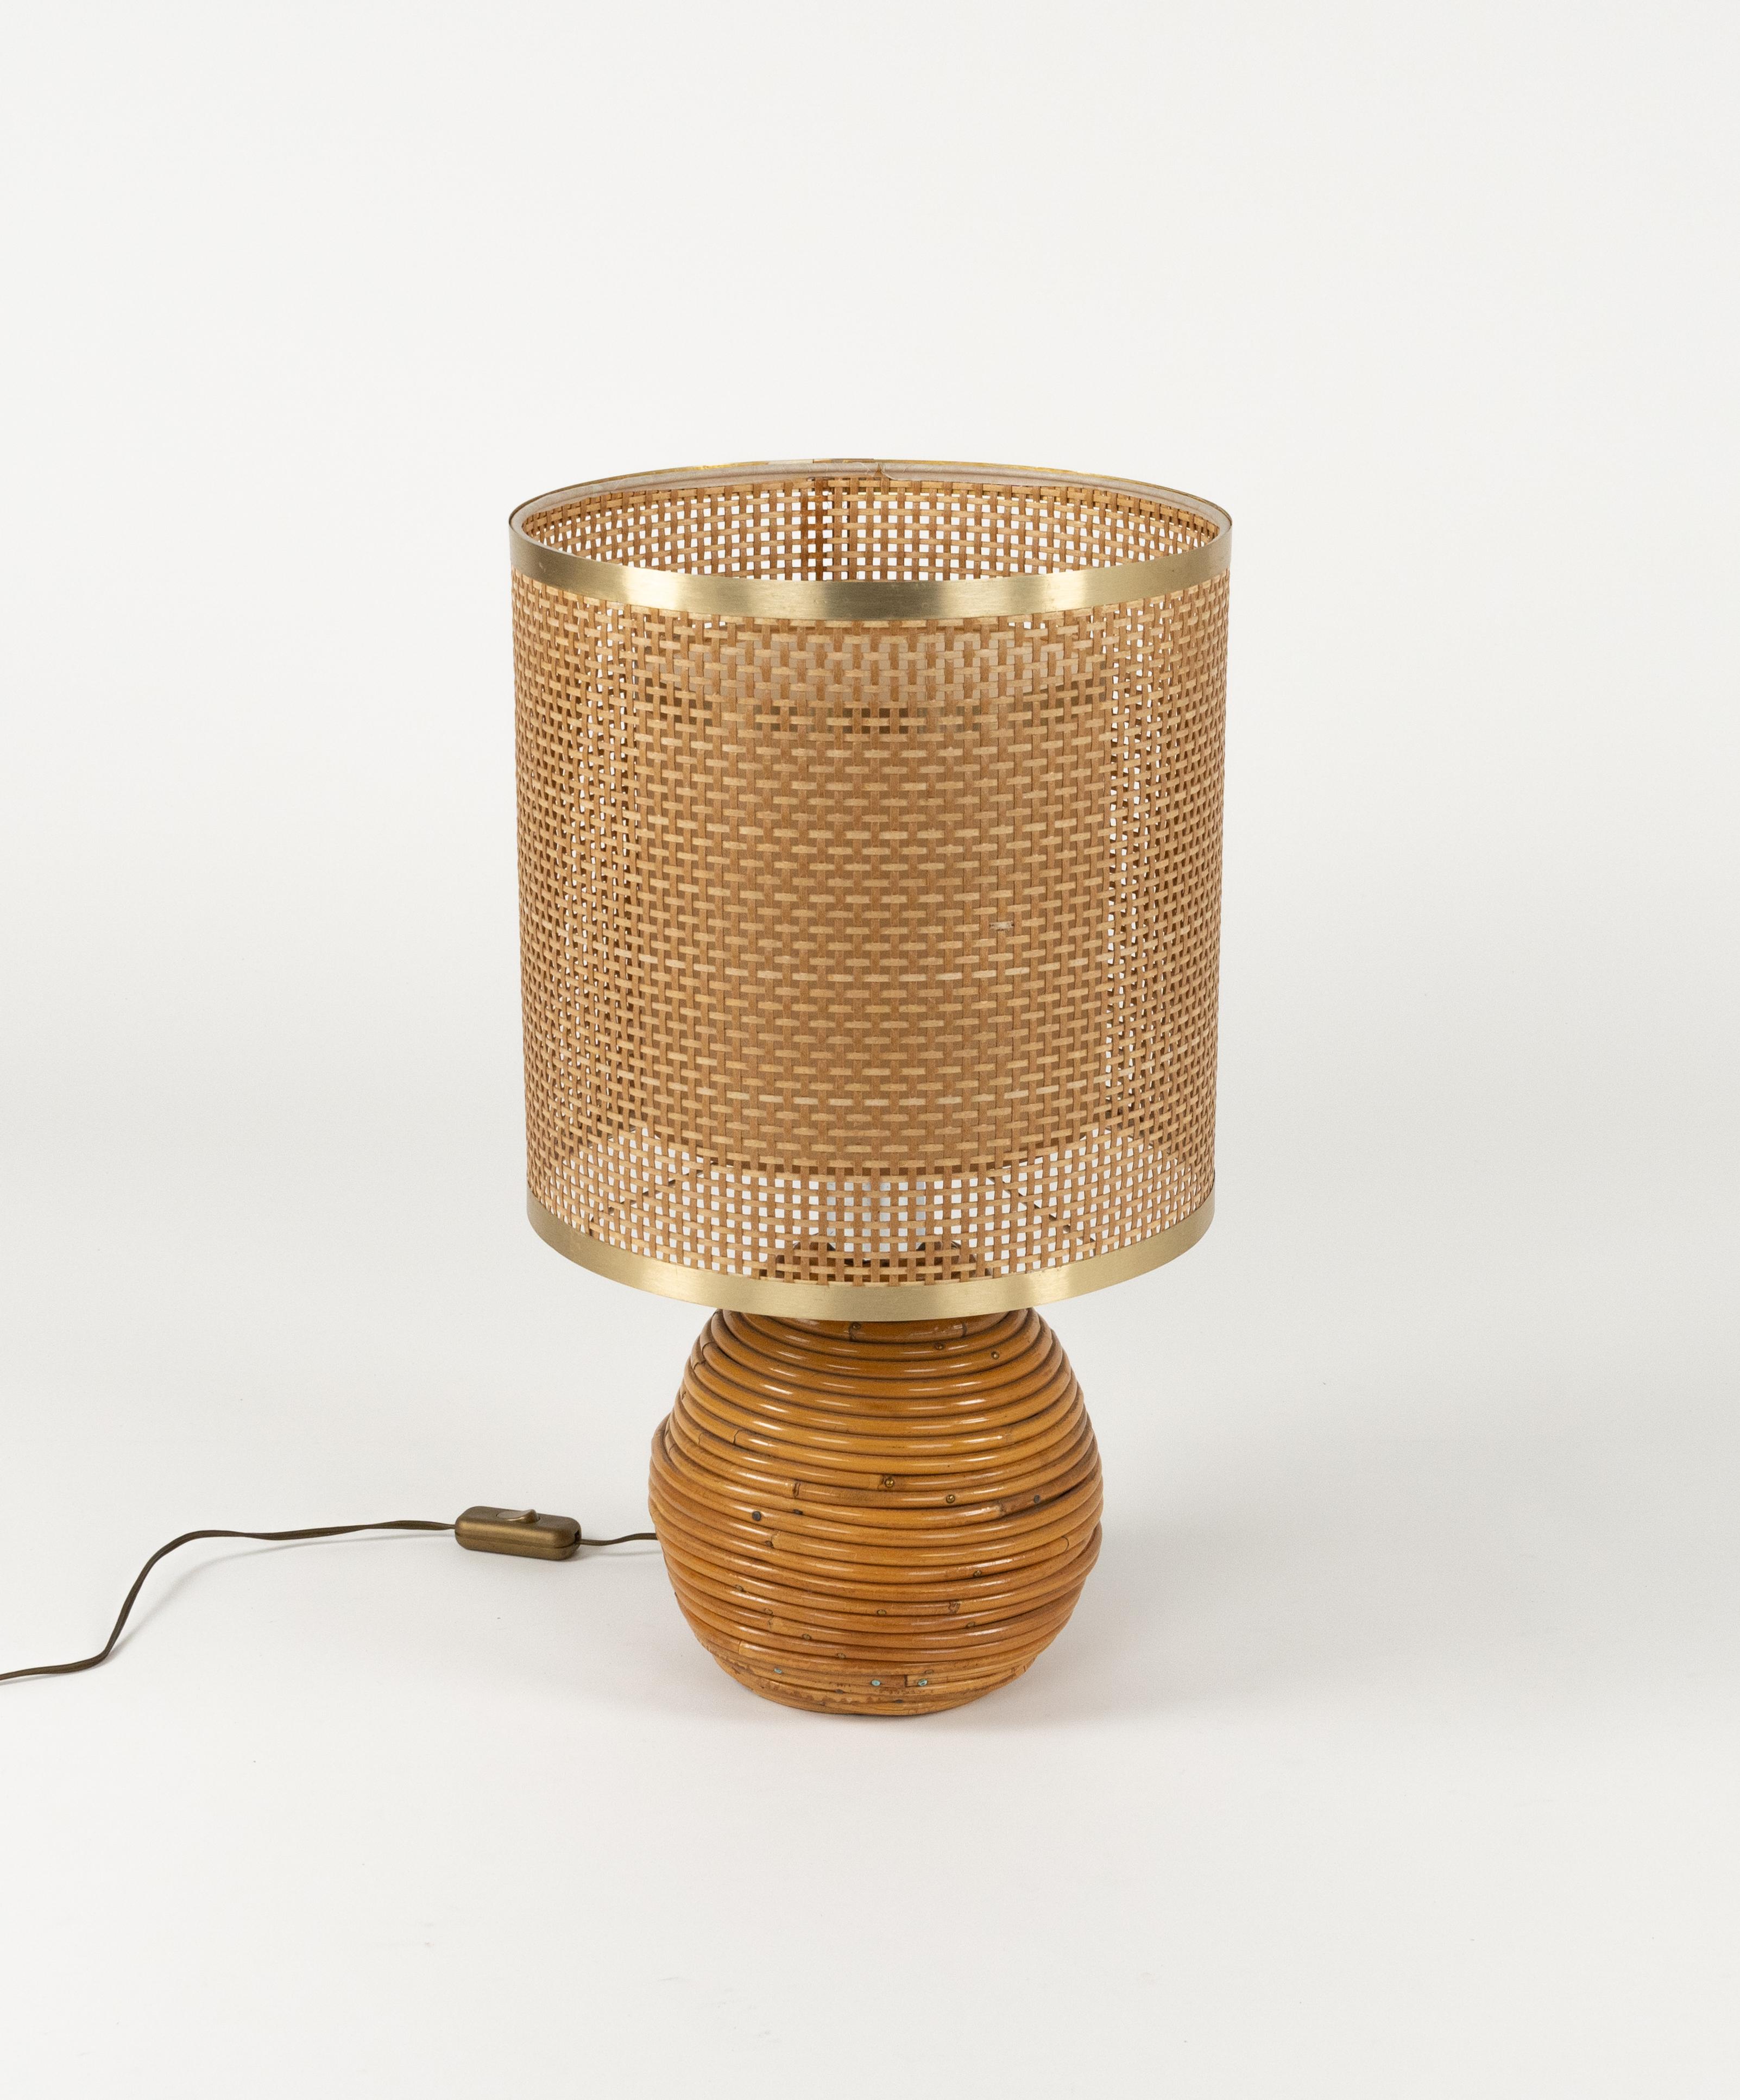 Midcentury amazing table lamp in curved rattan and chrome whit lampshade in wicker by Vivai Del Sud.

Made in Italy in the 1970s.

Vivai del sud, Gabriella Crespi and Arpex were the three leading design studios in 1970s Italy specialized in this